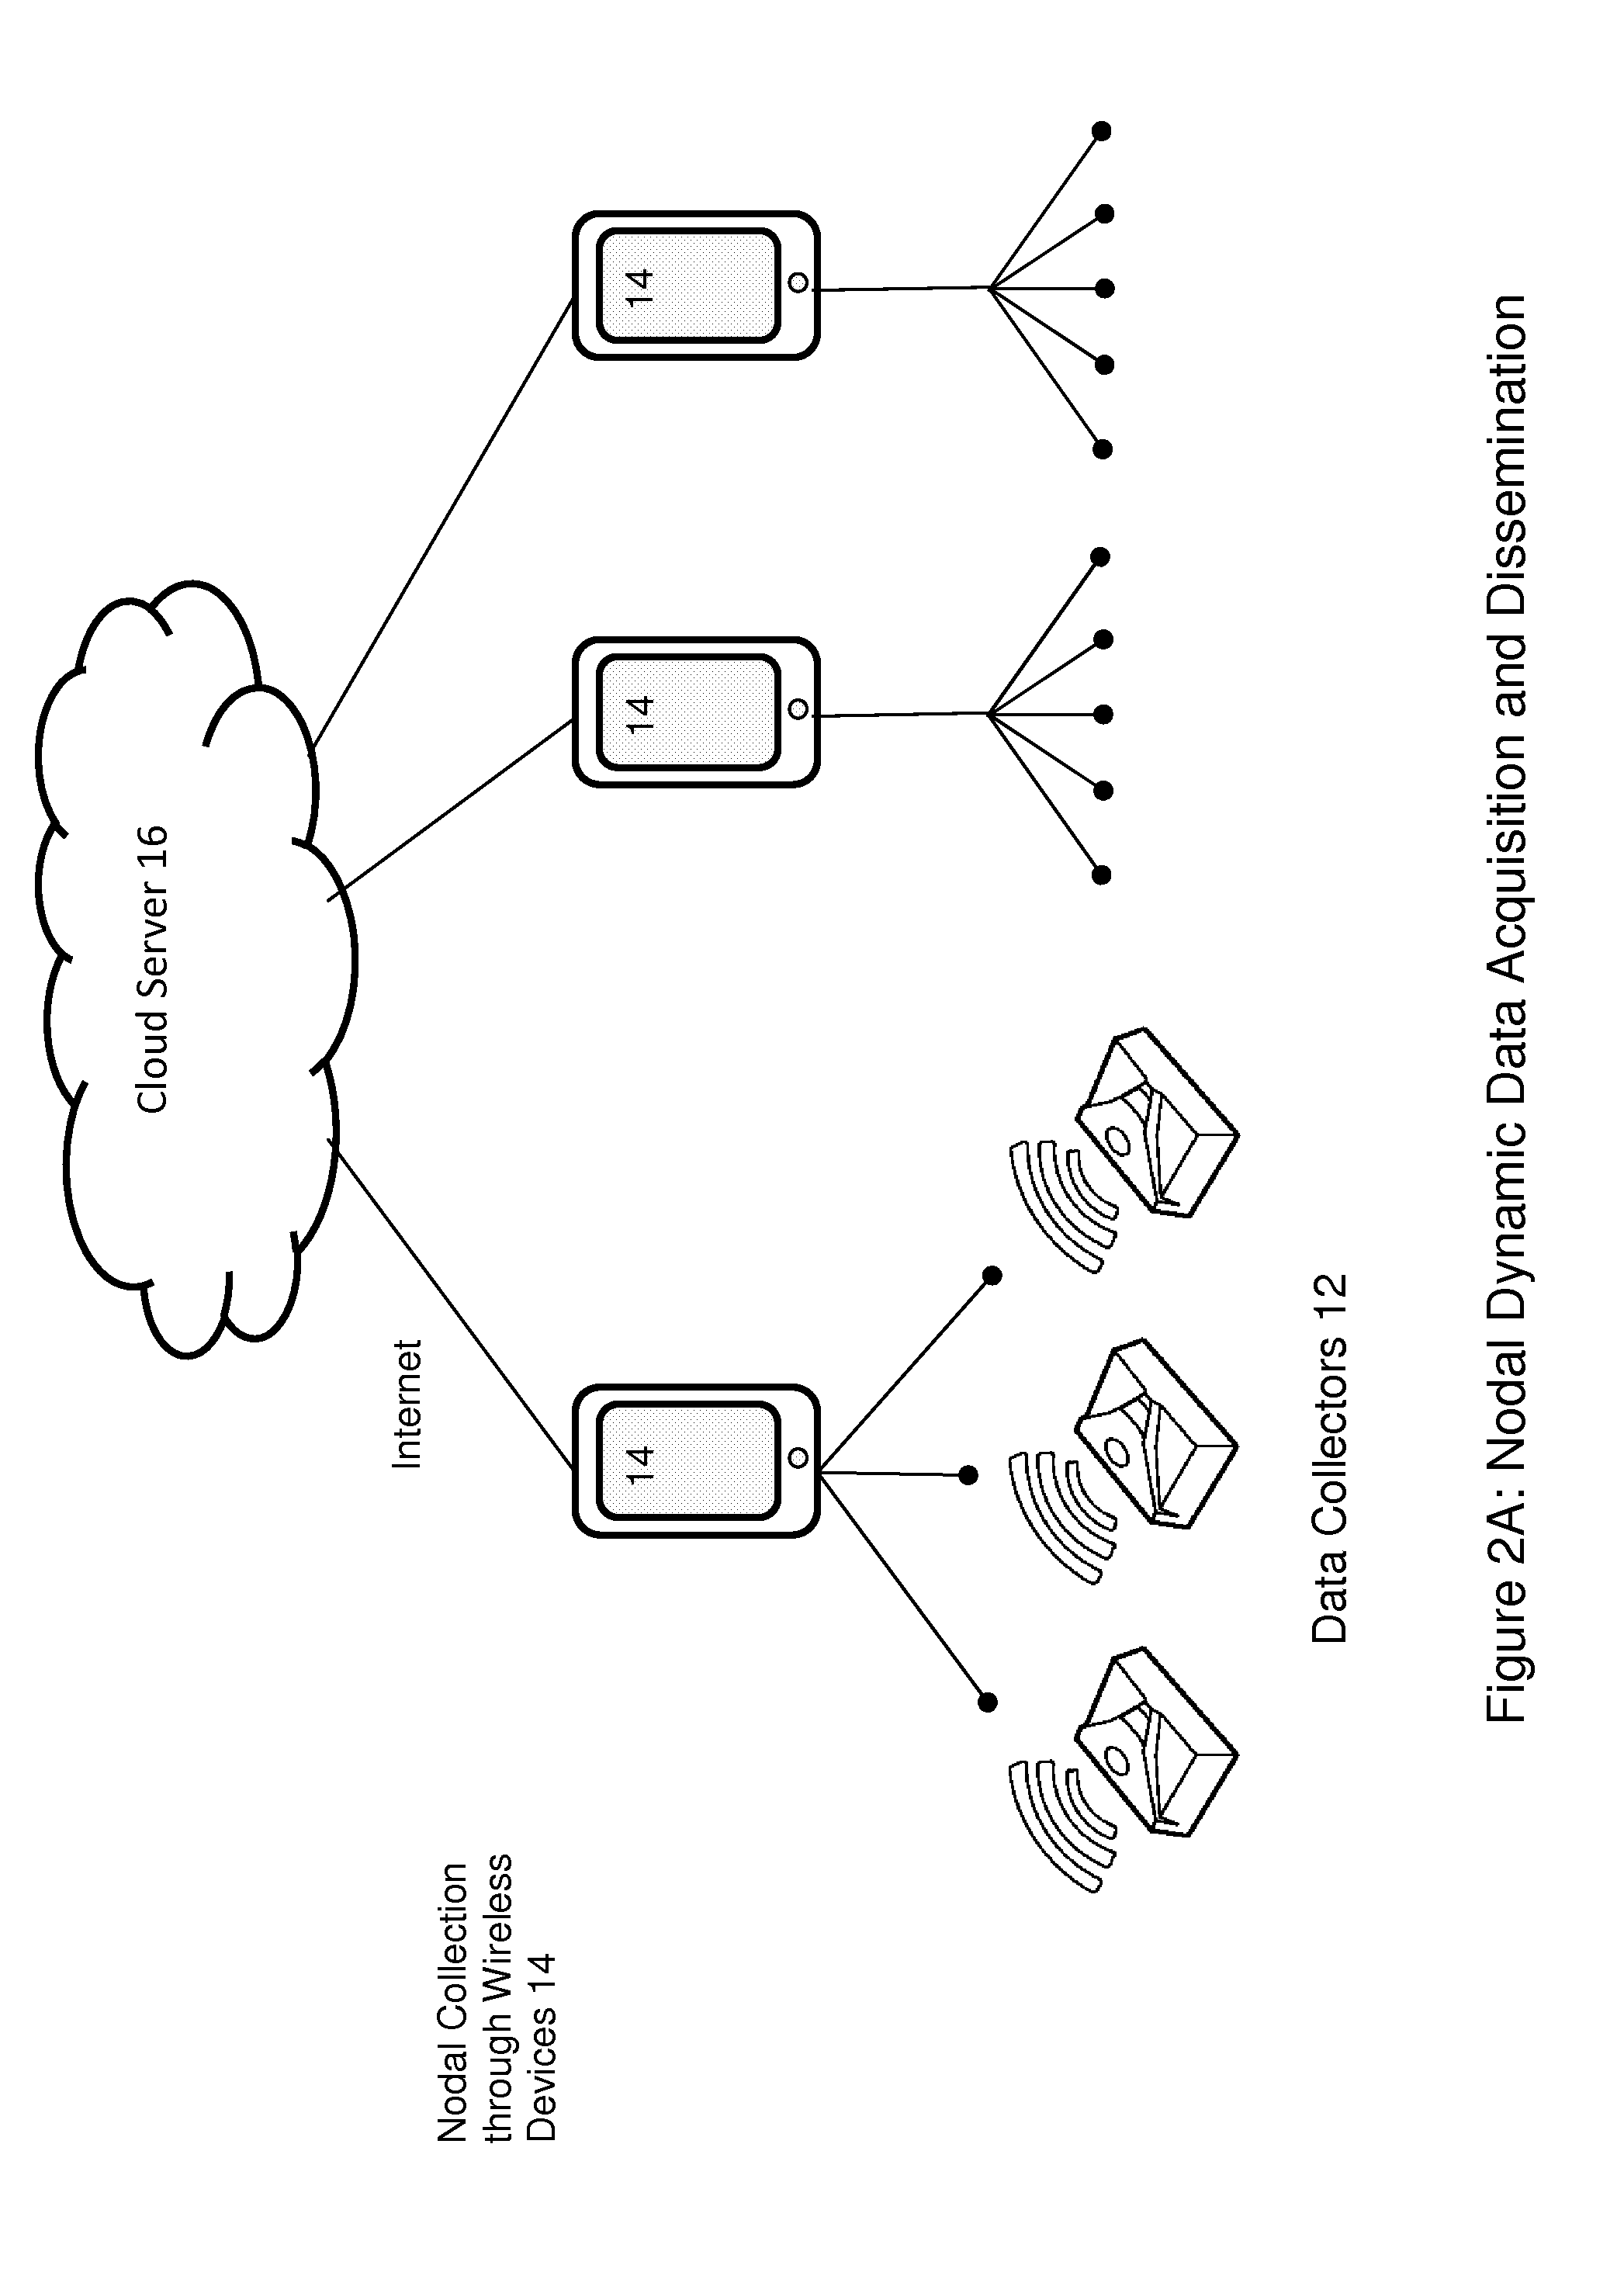 Nodal dynamic data acquisition and dissemination